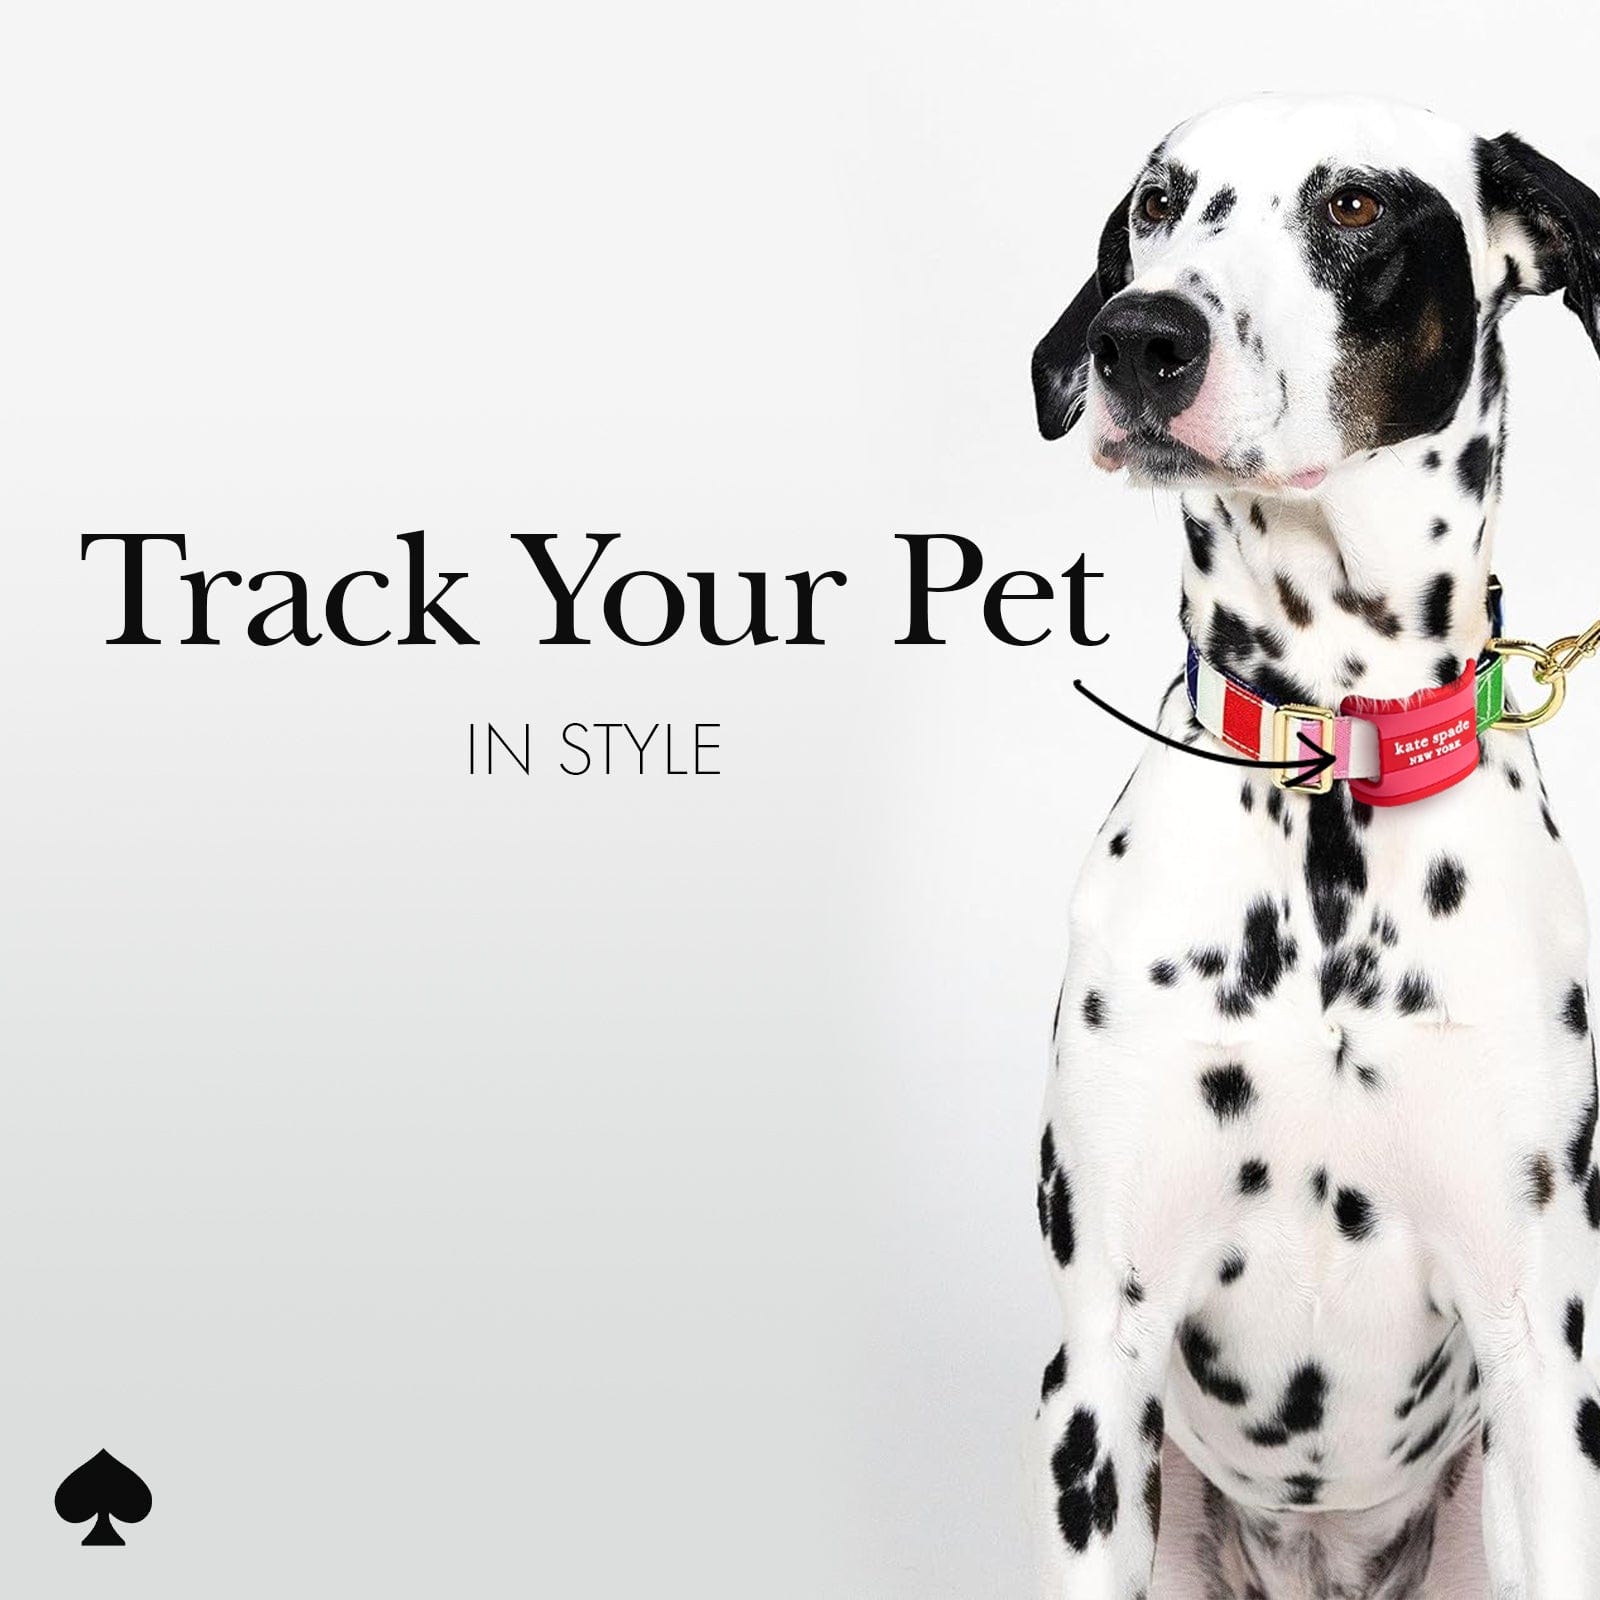 TRACK YOUR PET IN STYLE